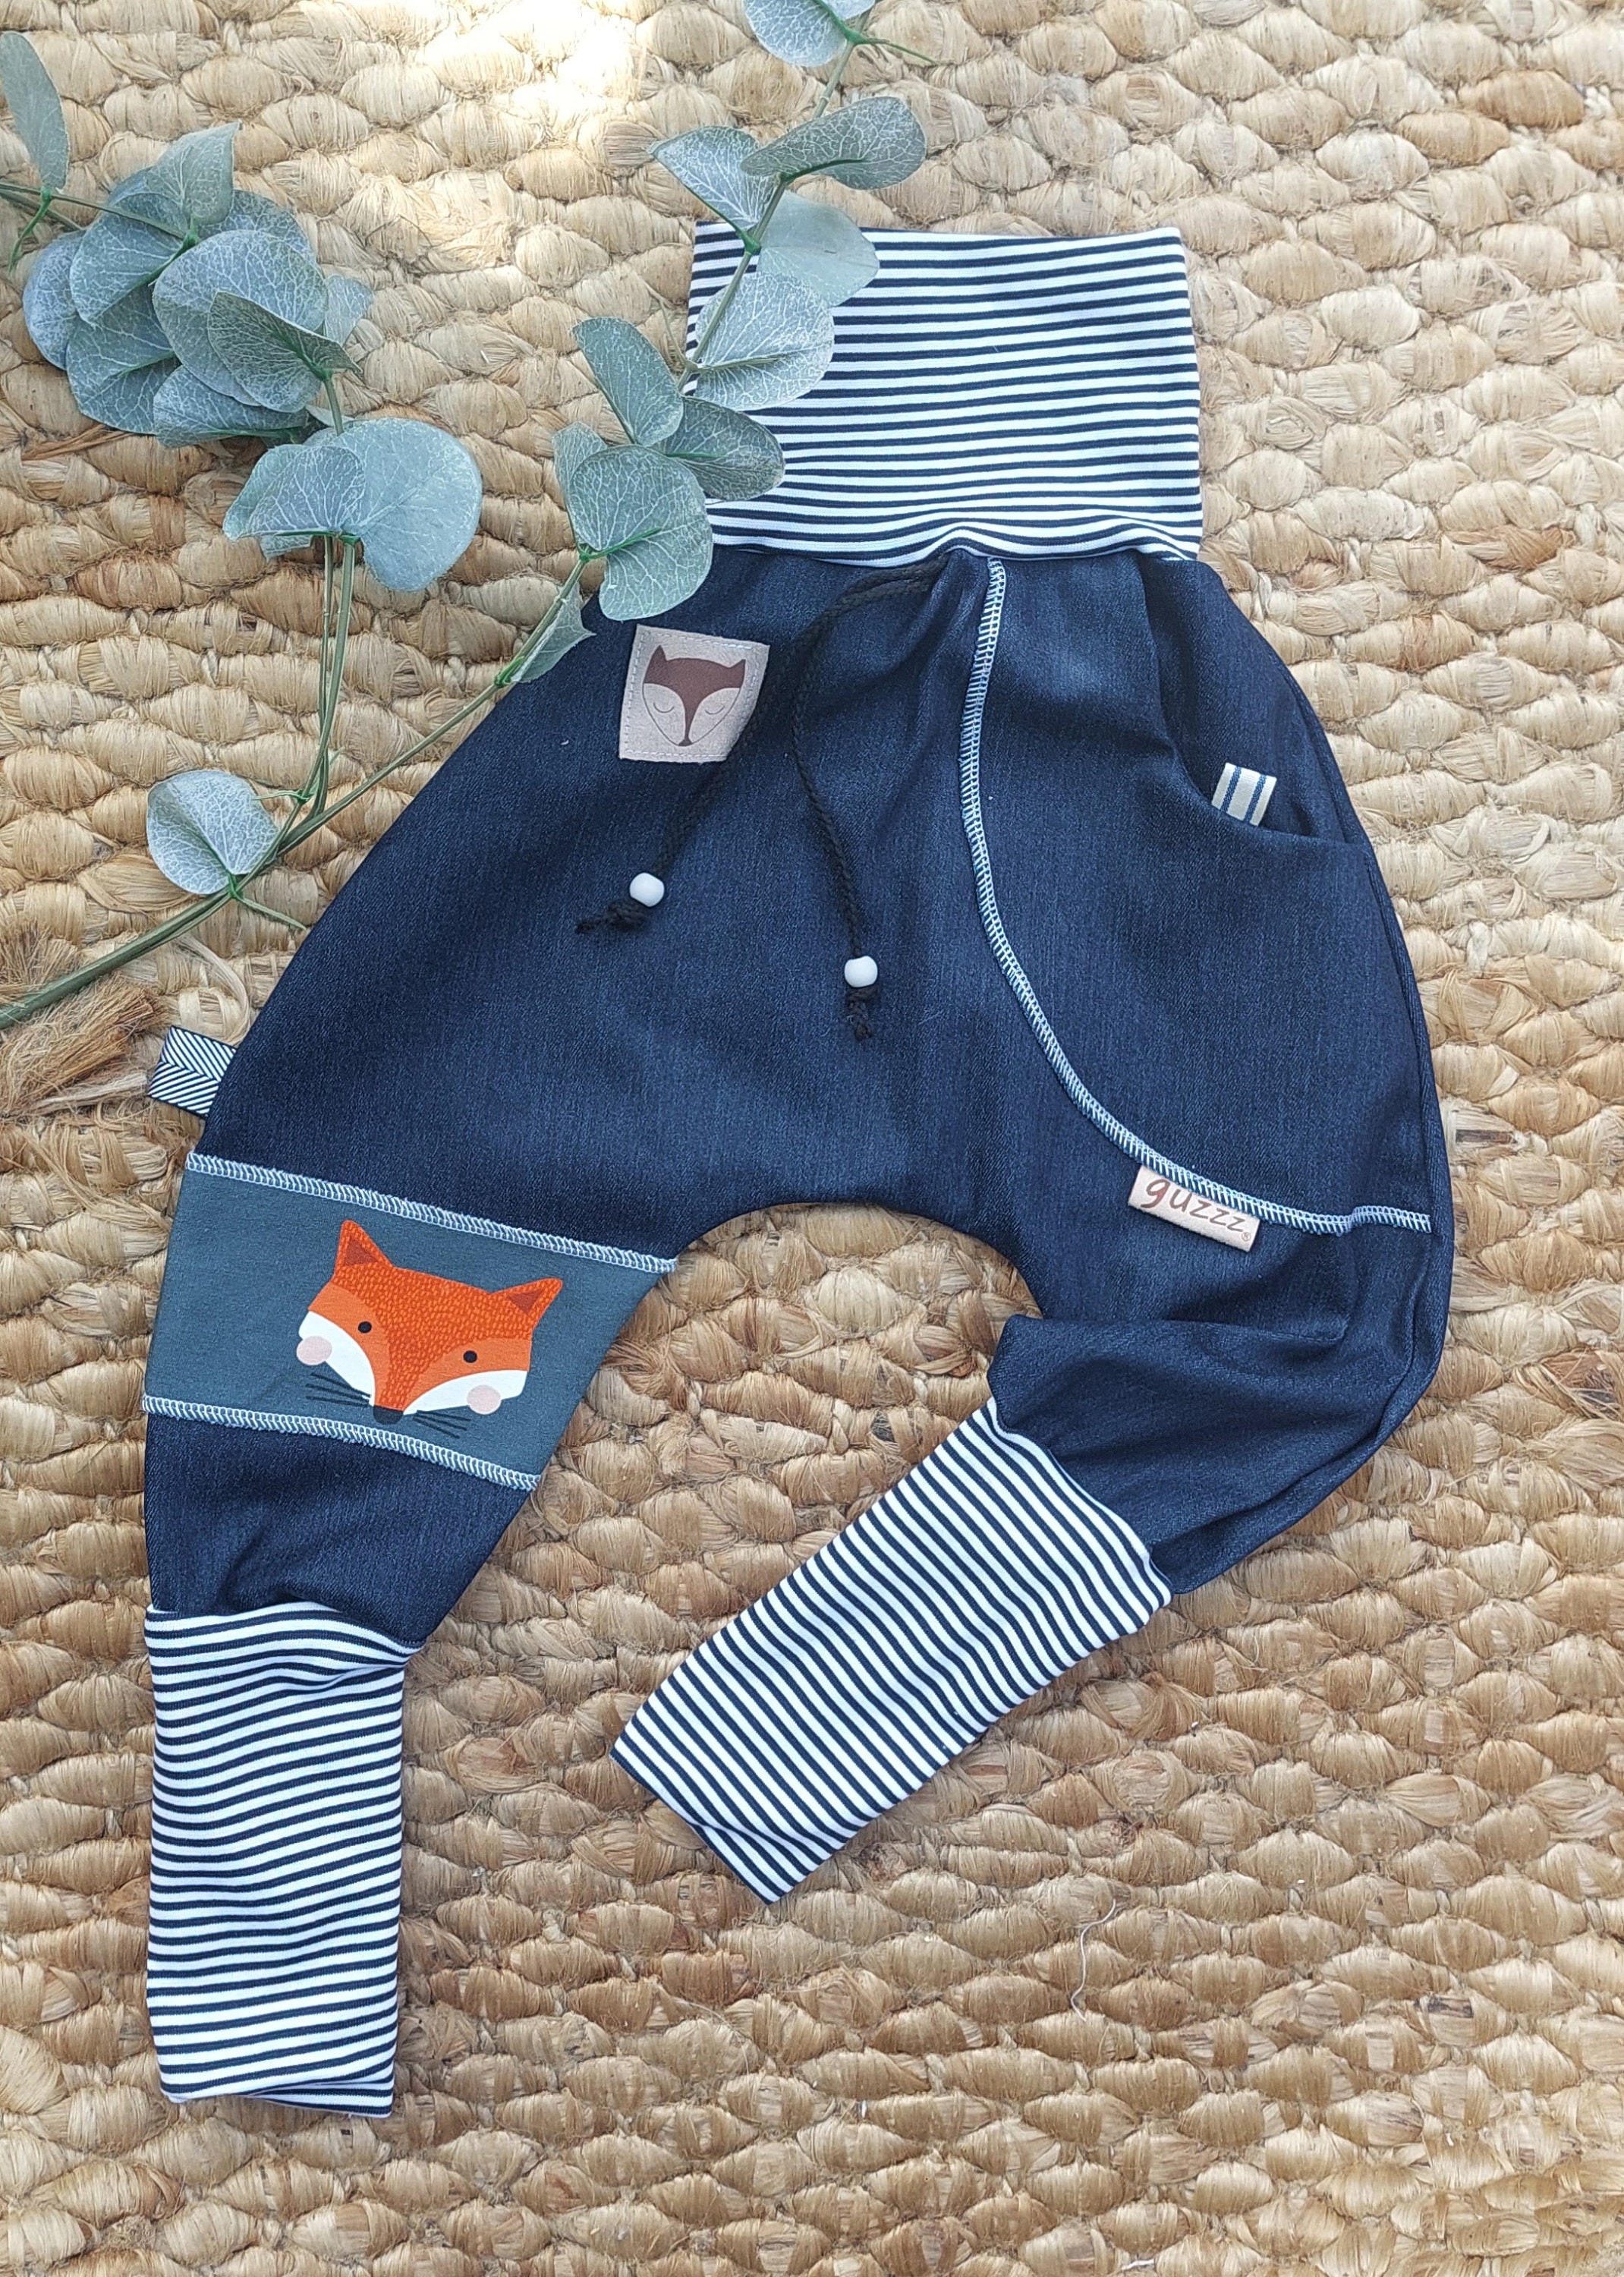 Starting Out Children's Place Baby Boys Jeans Outfit Pants Set 12M  Longsleeve | eBay